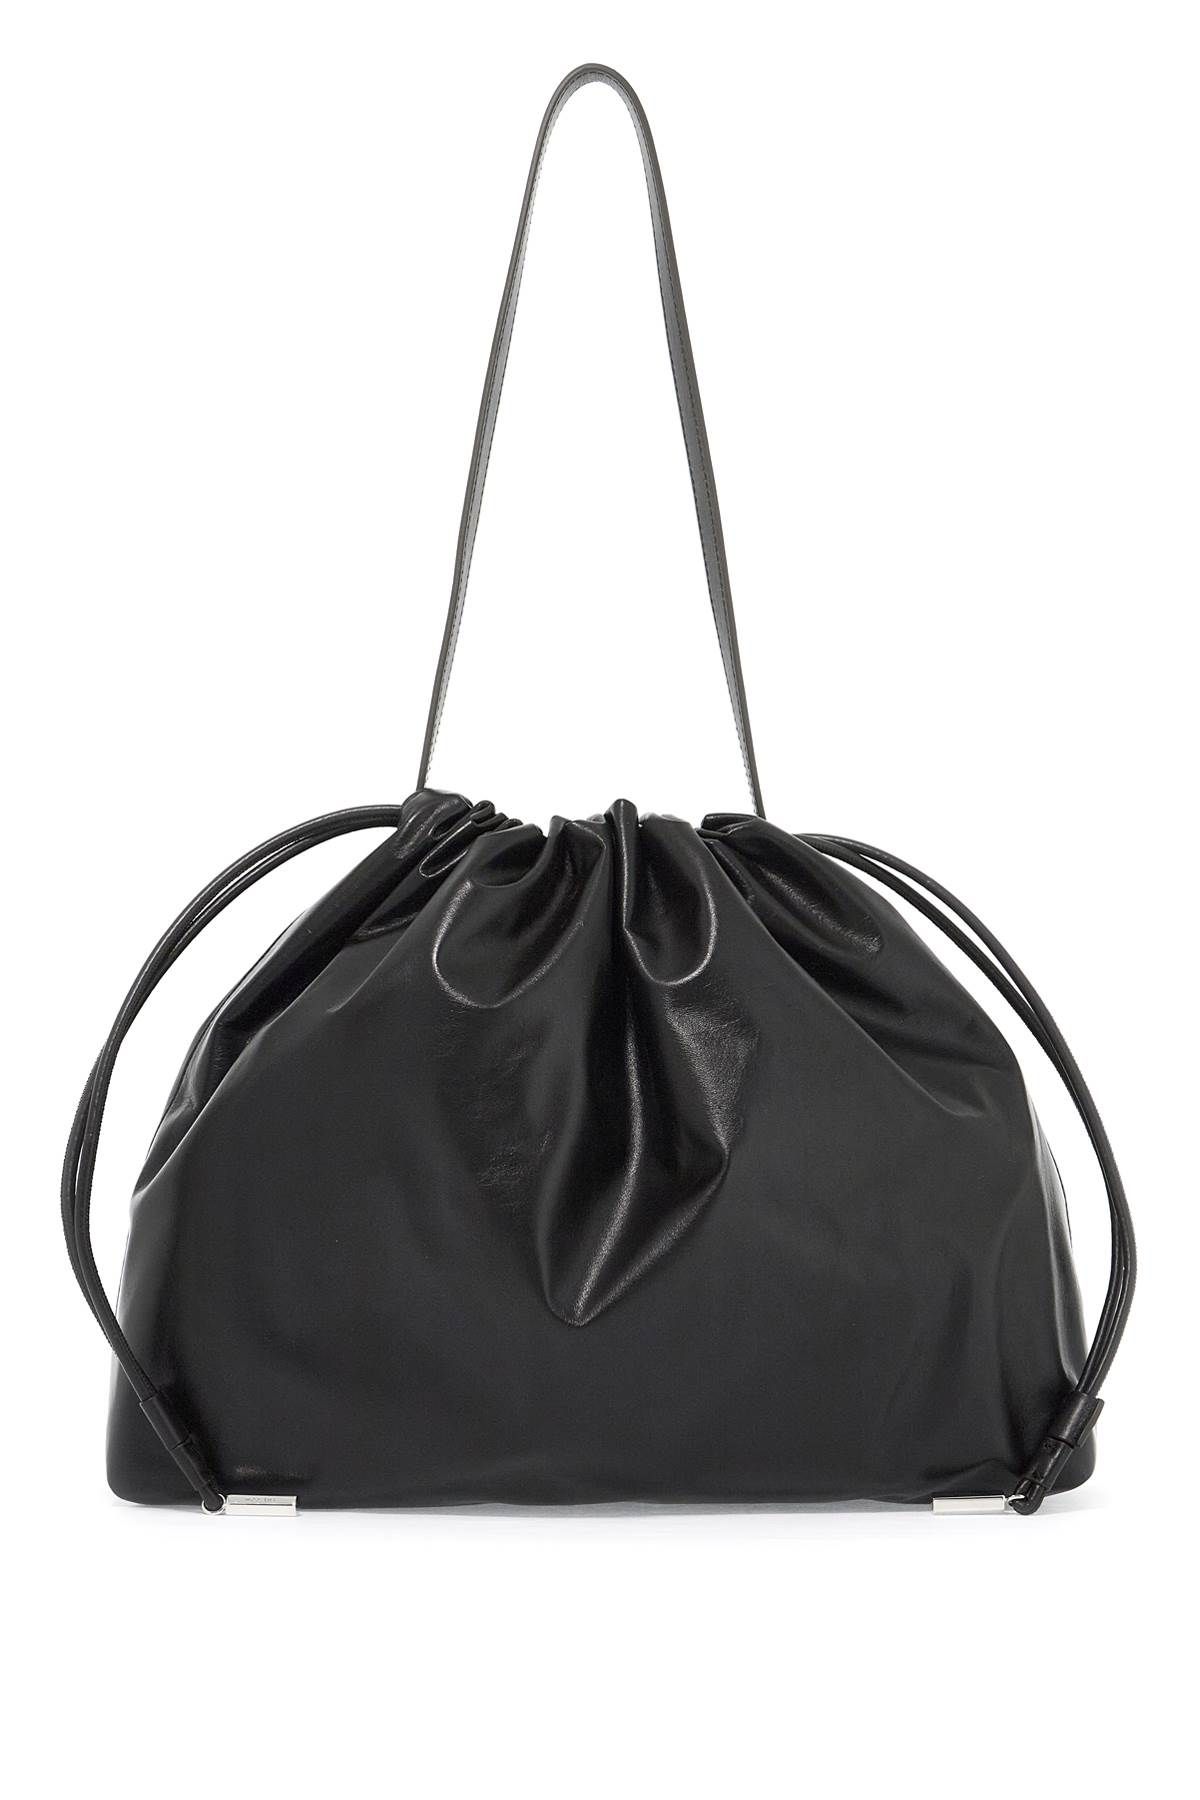 The Row THE ROW "angy shoulder bag in nappa